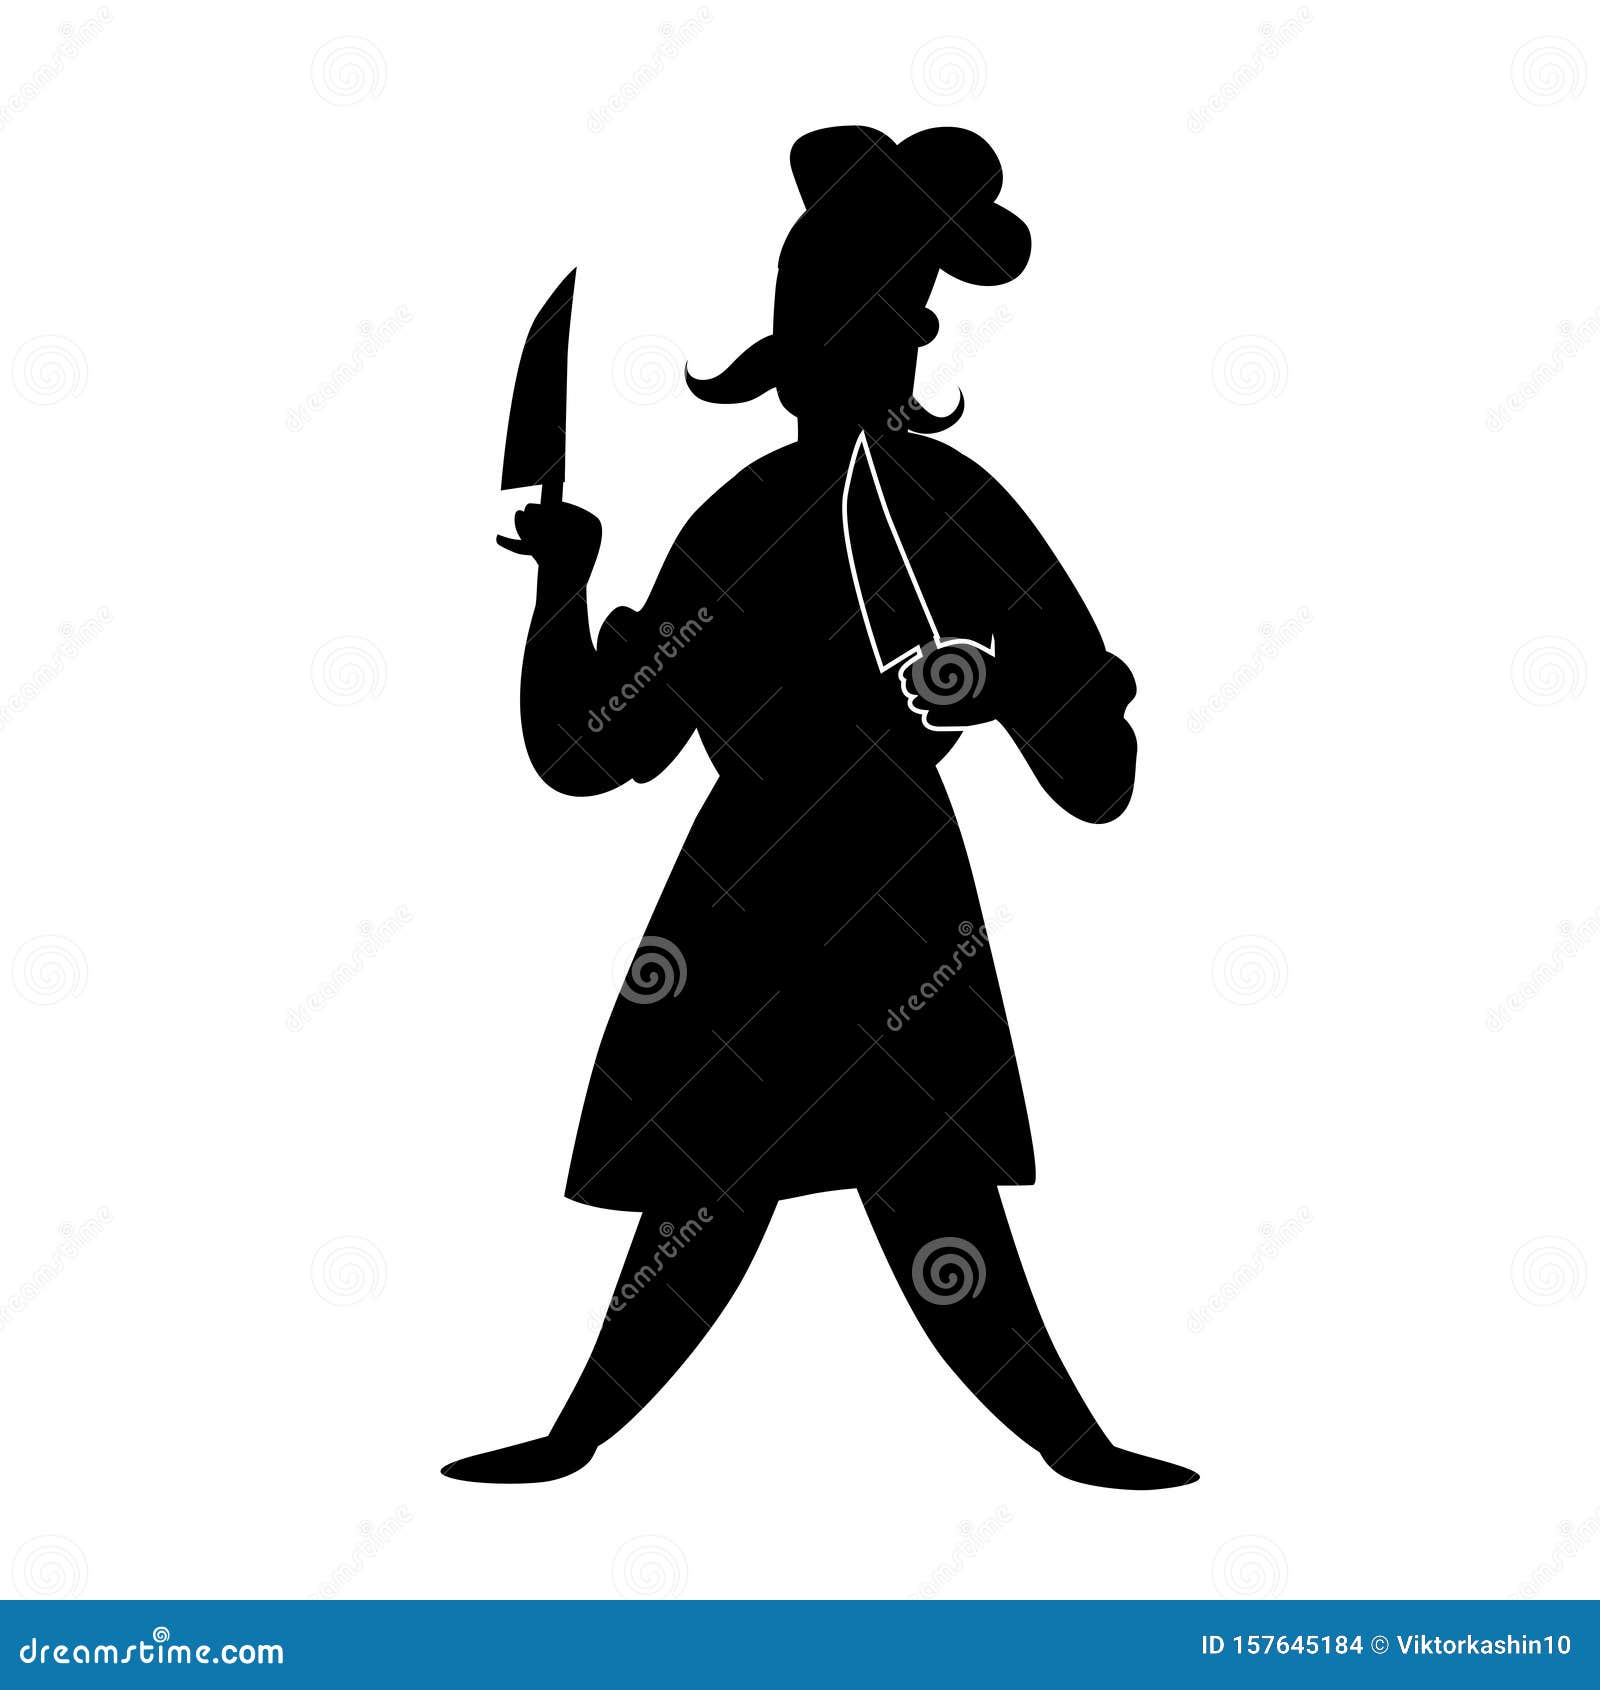 Composition Black Knives Isolated White Background Composition Chef Knife  Bread Stock Photo by ©serega100500 319637252